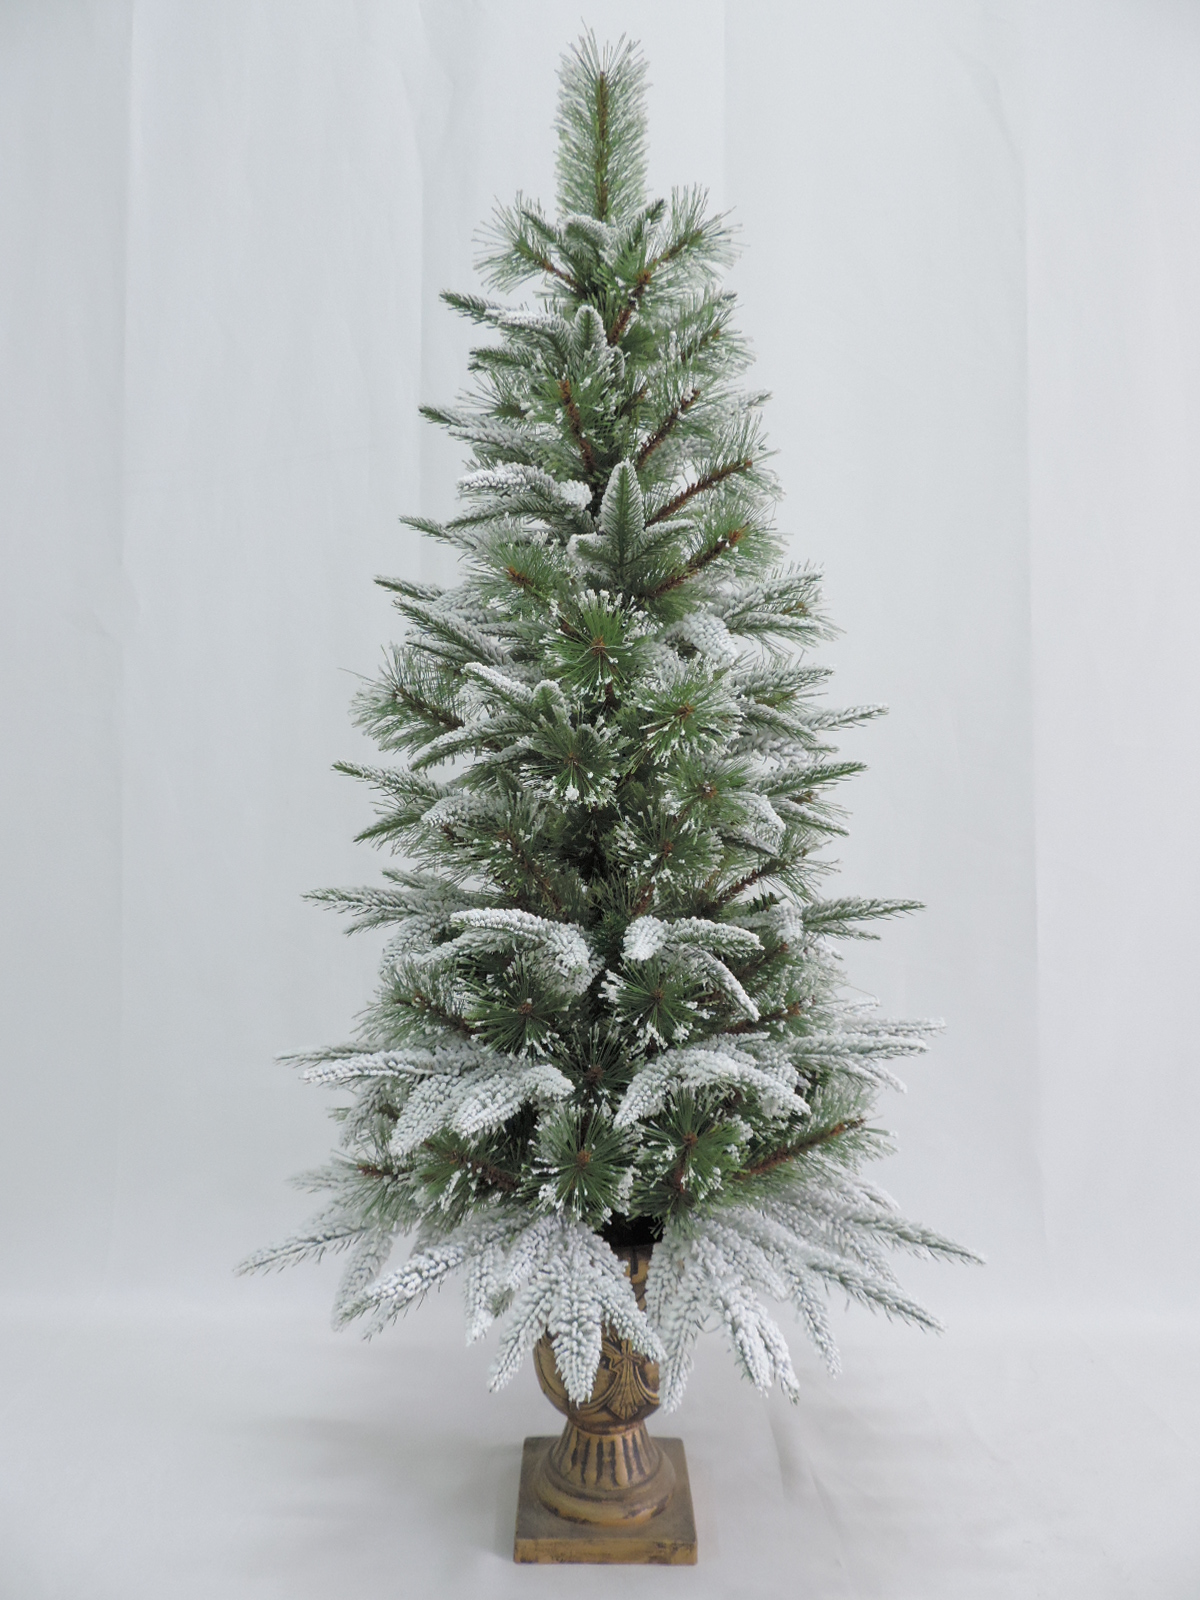 2022 High quality Gifts Tree - Artificial christmas home wedding decoration gifts ornament pot ree/16-PT3-4FT – Future